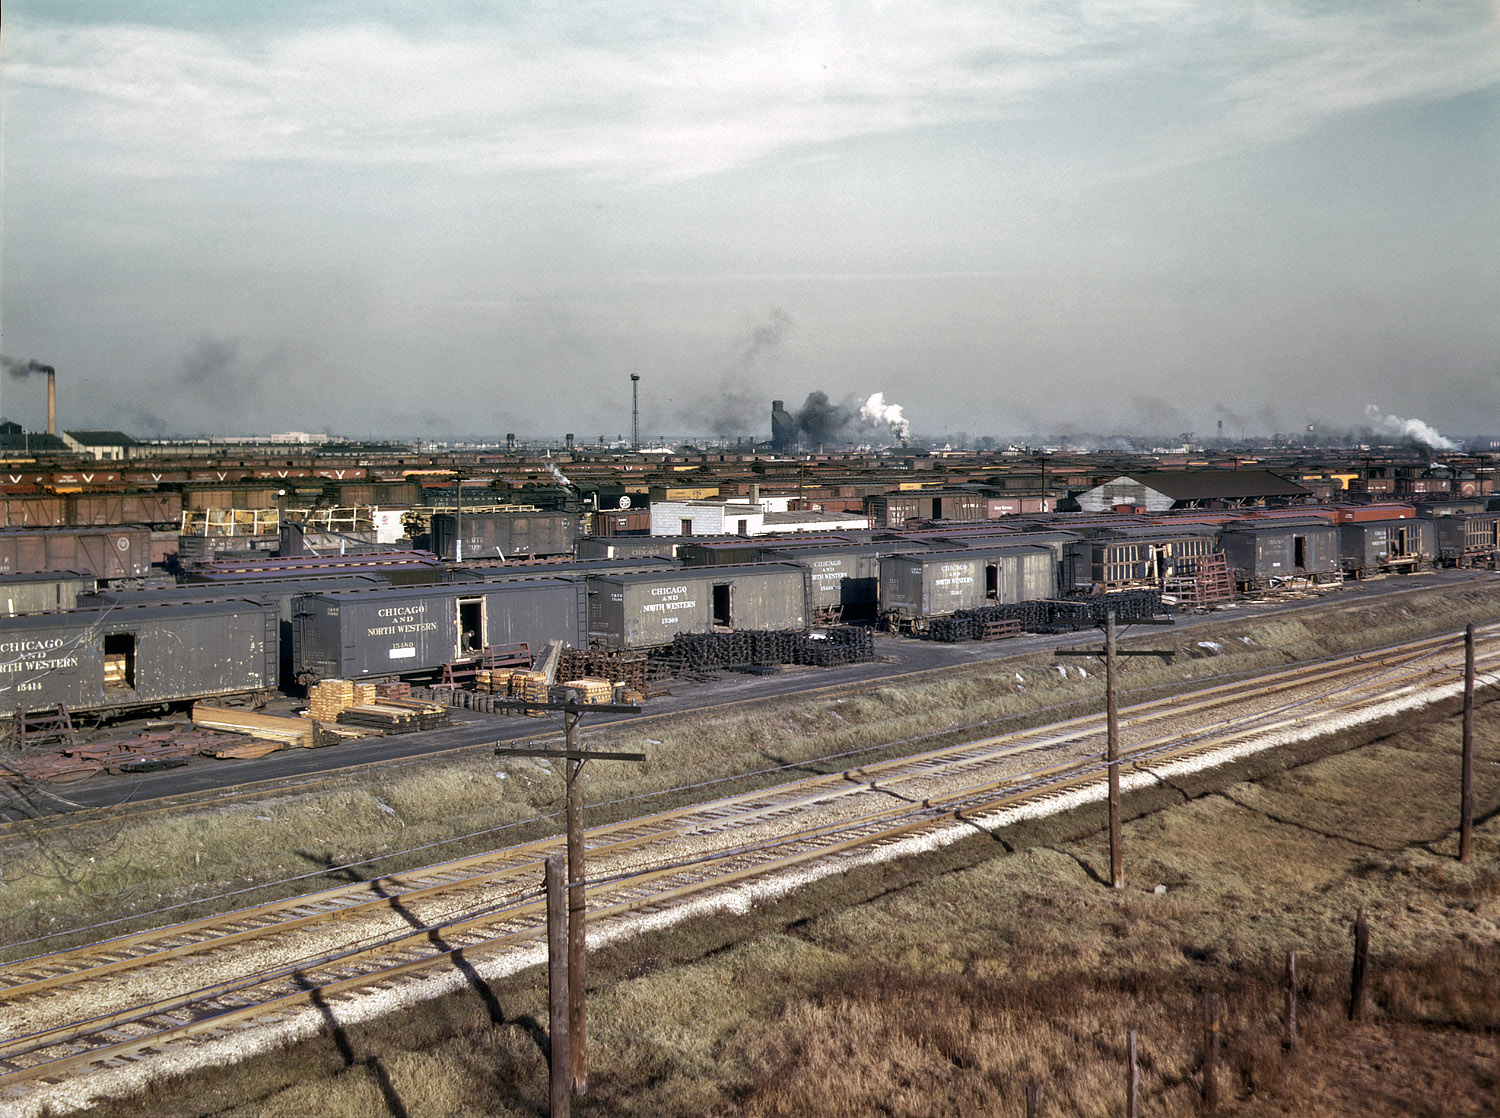 South Yards at the Chicago & North Western Proviso Yards. December 1942. View full size. 4x5 Kodachrome transparency by Jack Delano.